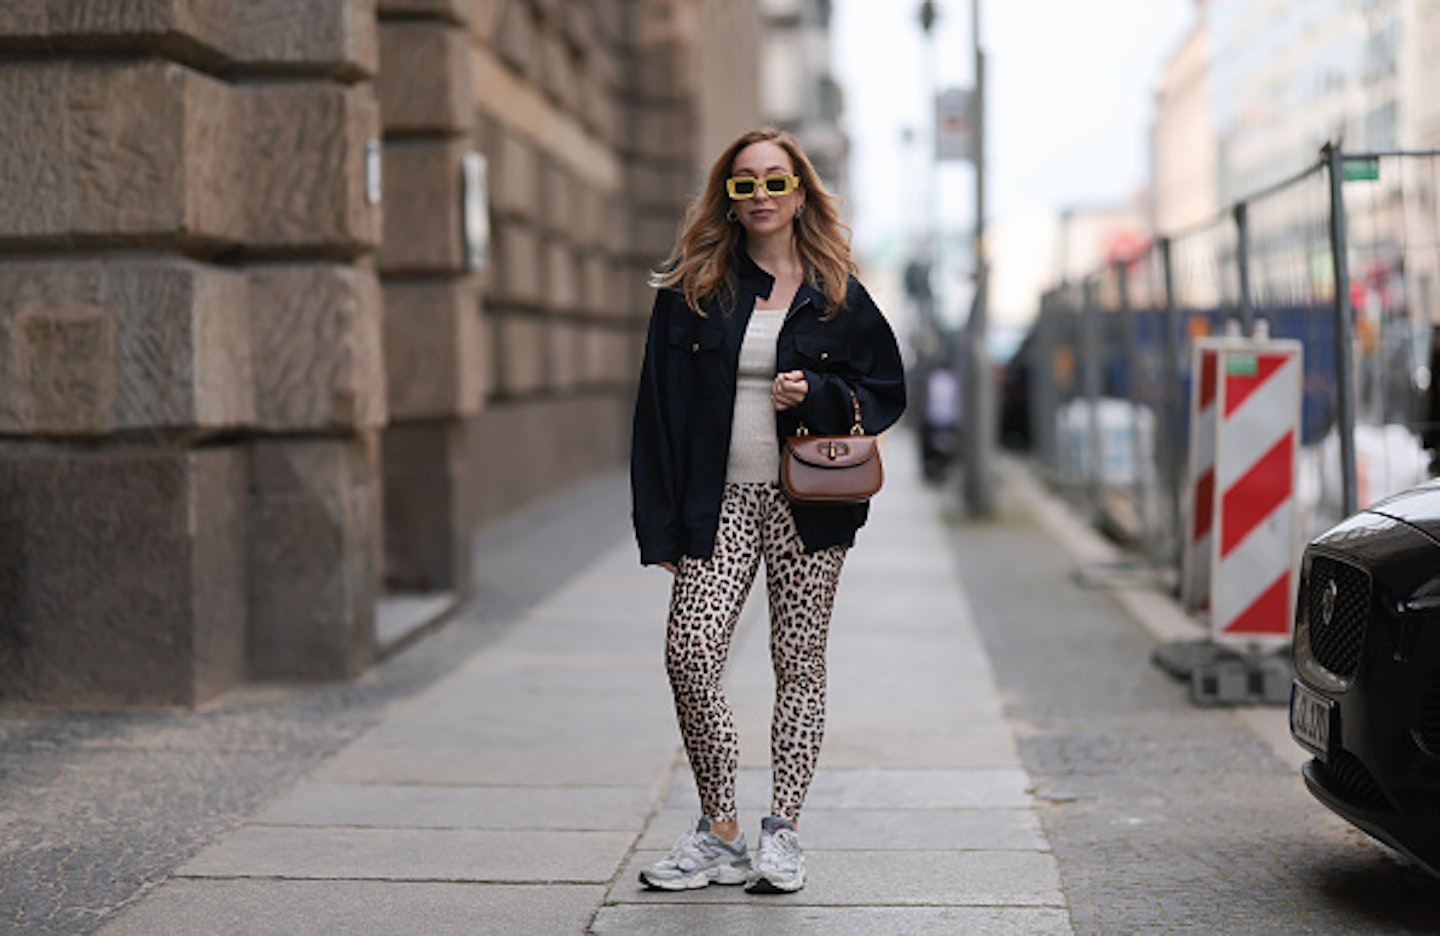 How To Style Patterned Leggings